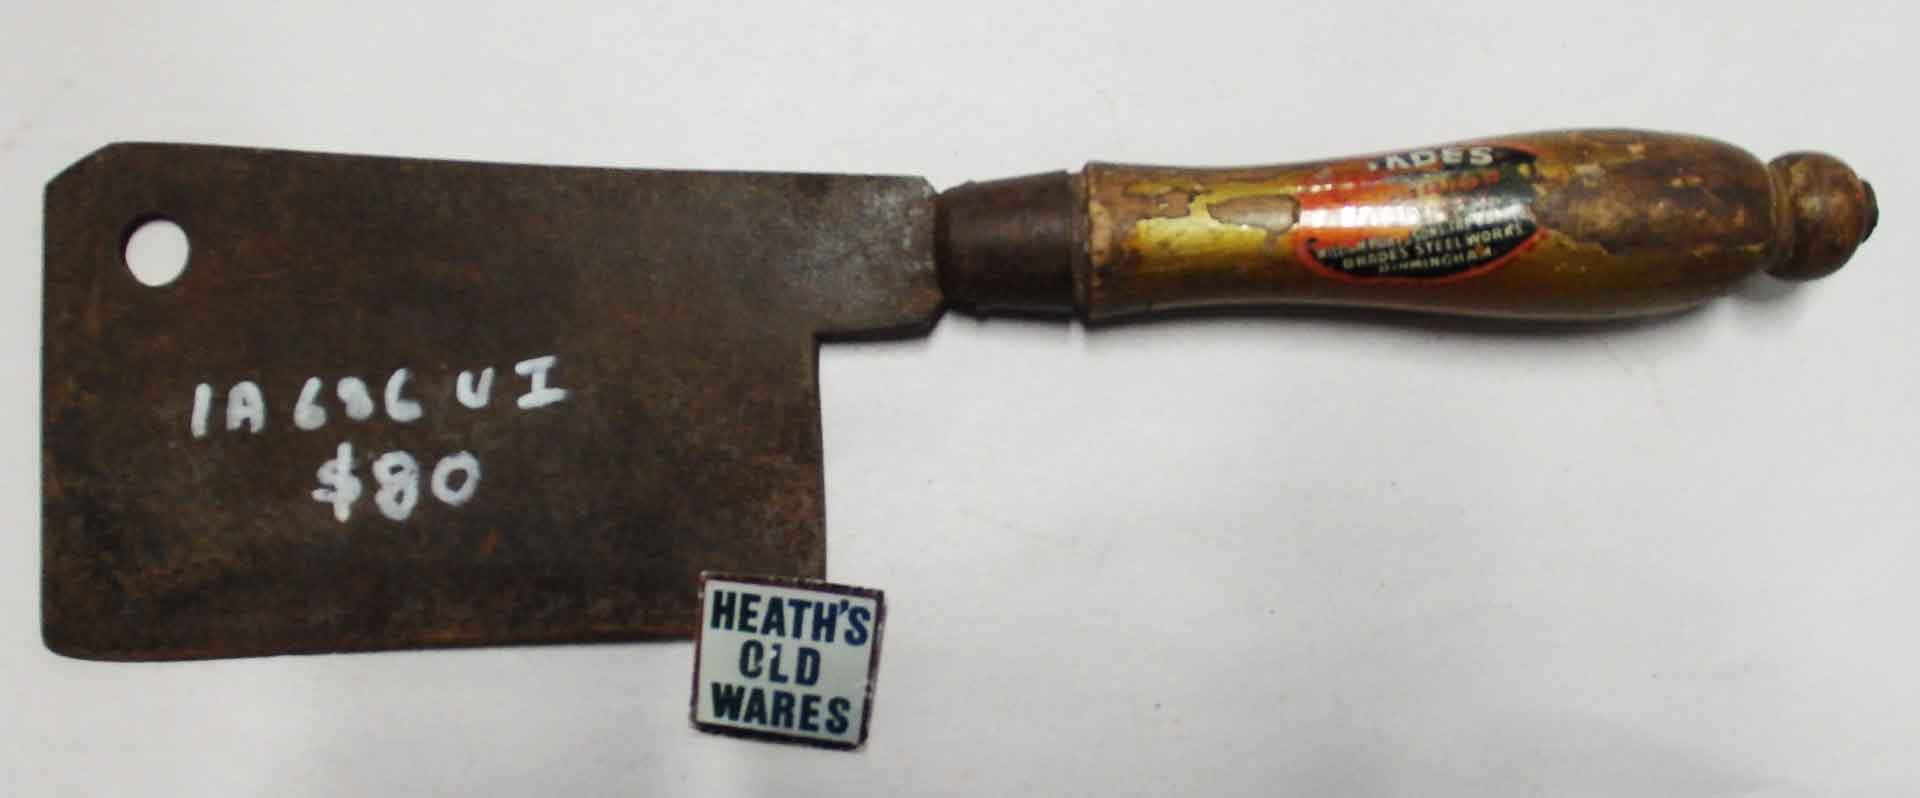 Brades cleaver $80 for sale at Heaths Old Wares, Collectables, Antiques & Industrial Antiques, 19-21 Broadway, Burringbar NSW 2483 Ph 0266771181 open 7 days